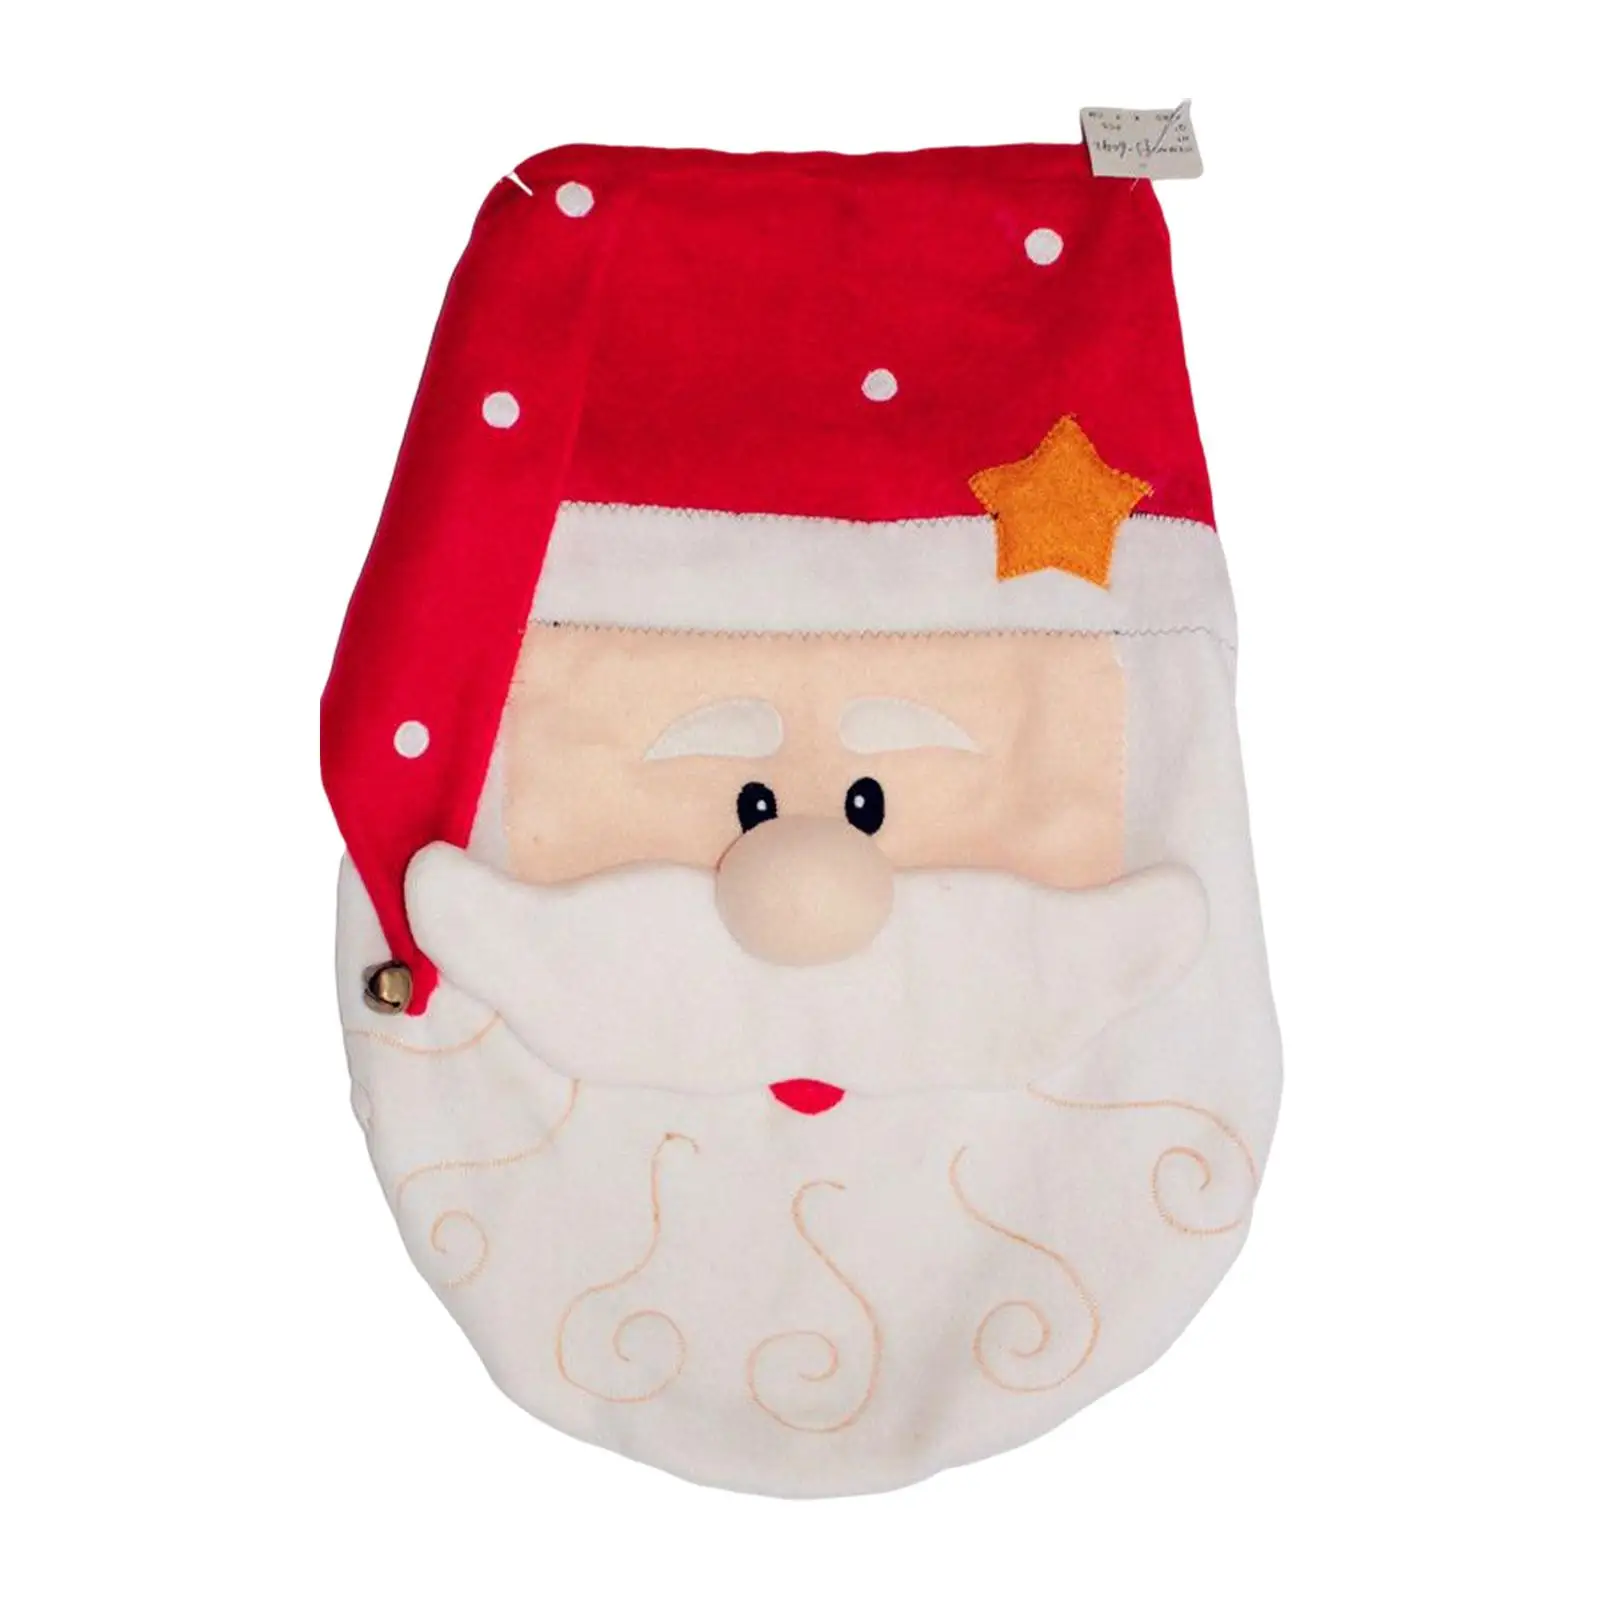 Cute Toilet Seat Cover Christmas Ornament Supplies Red Lid Cover Mat for